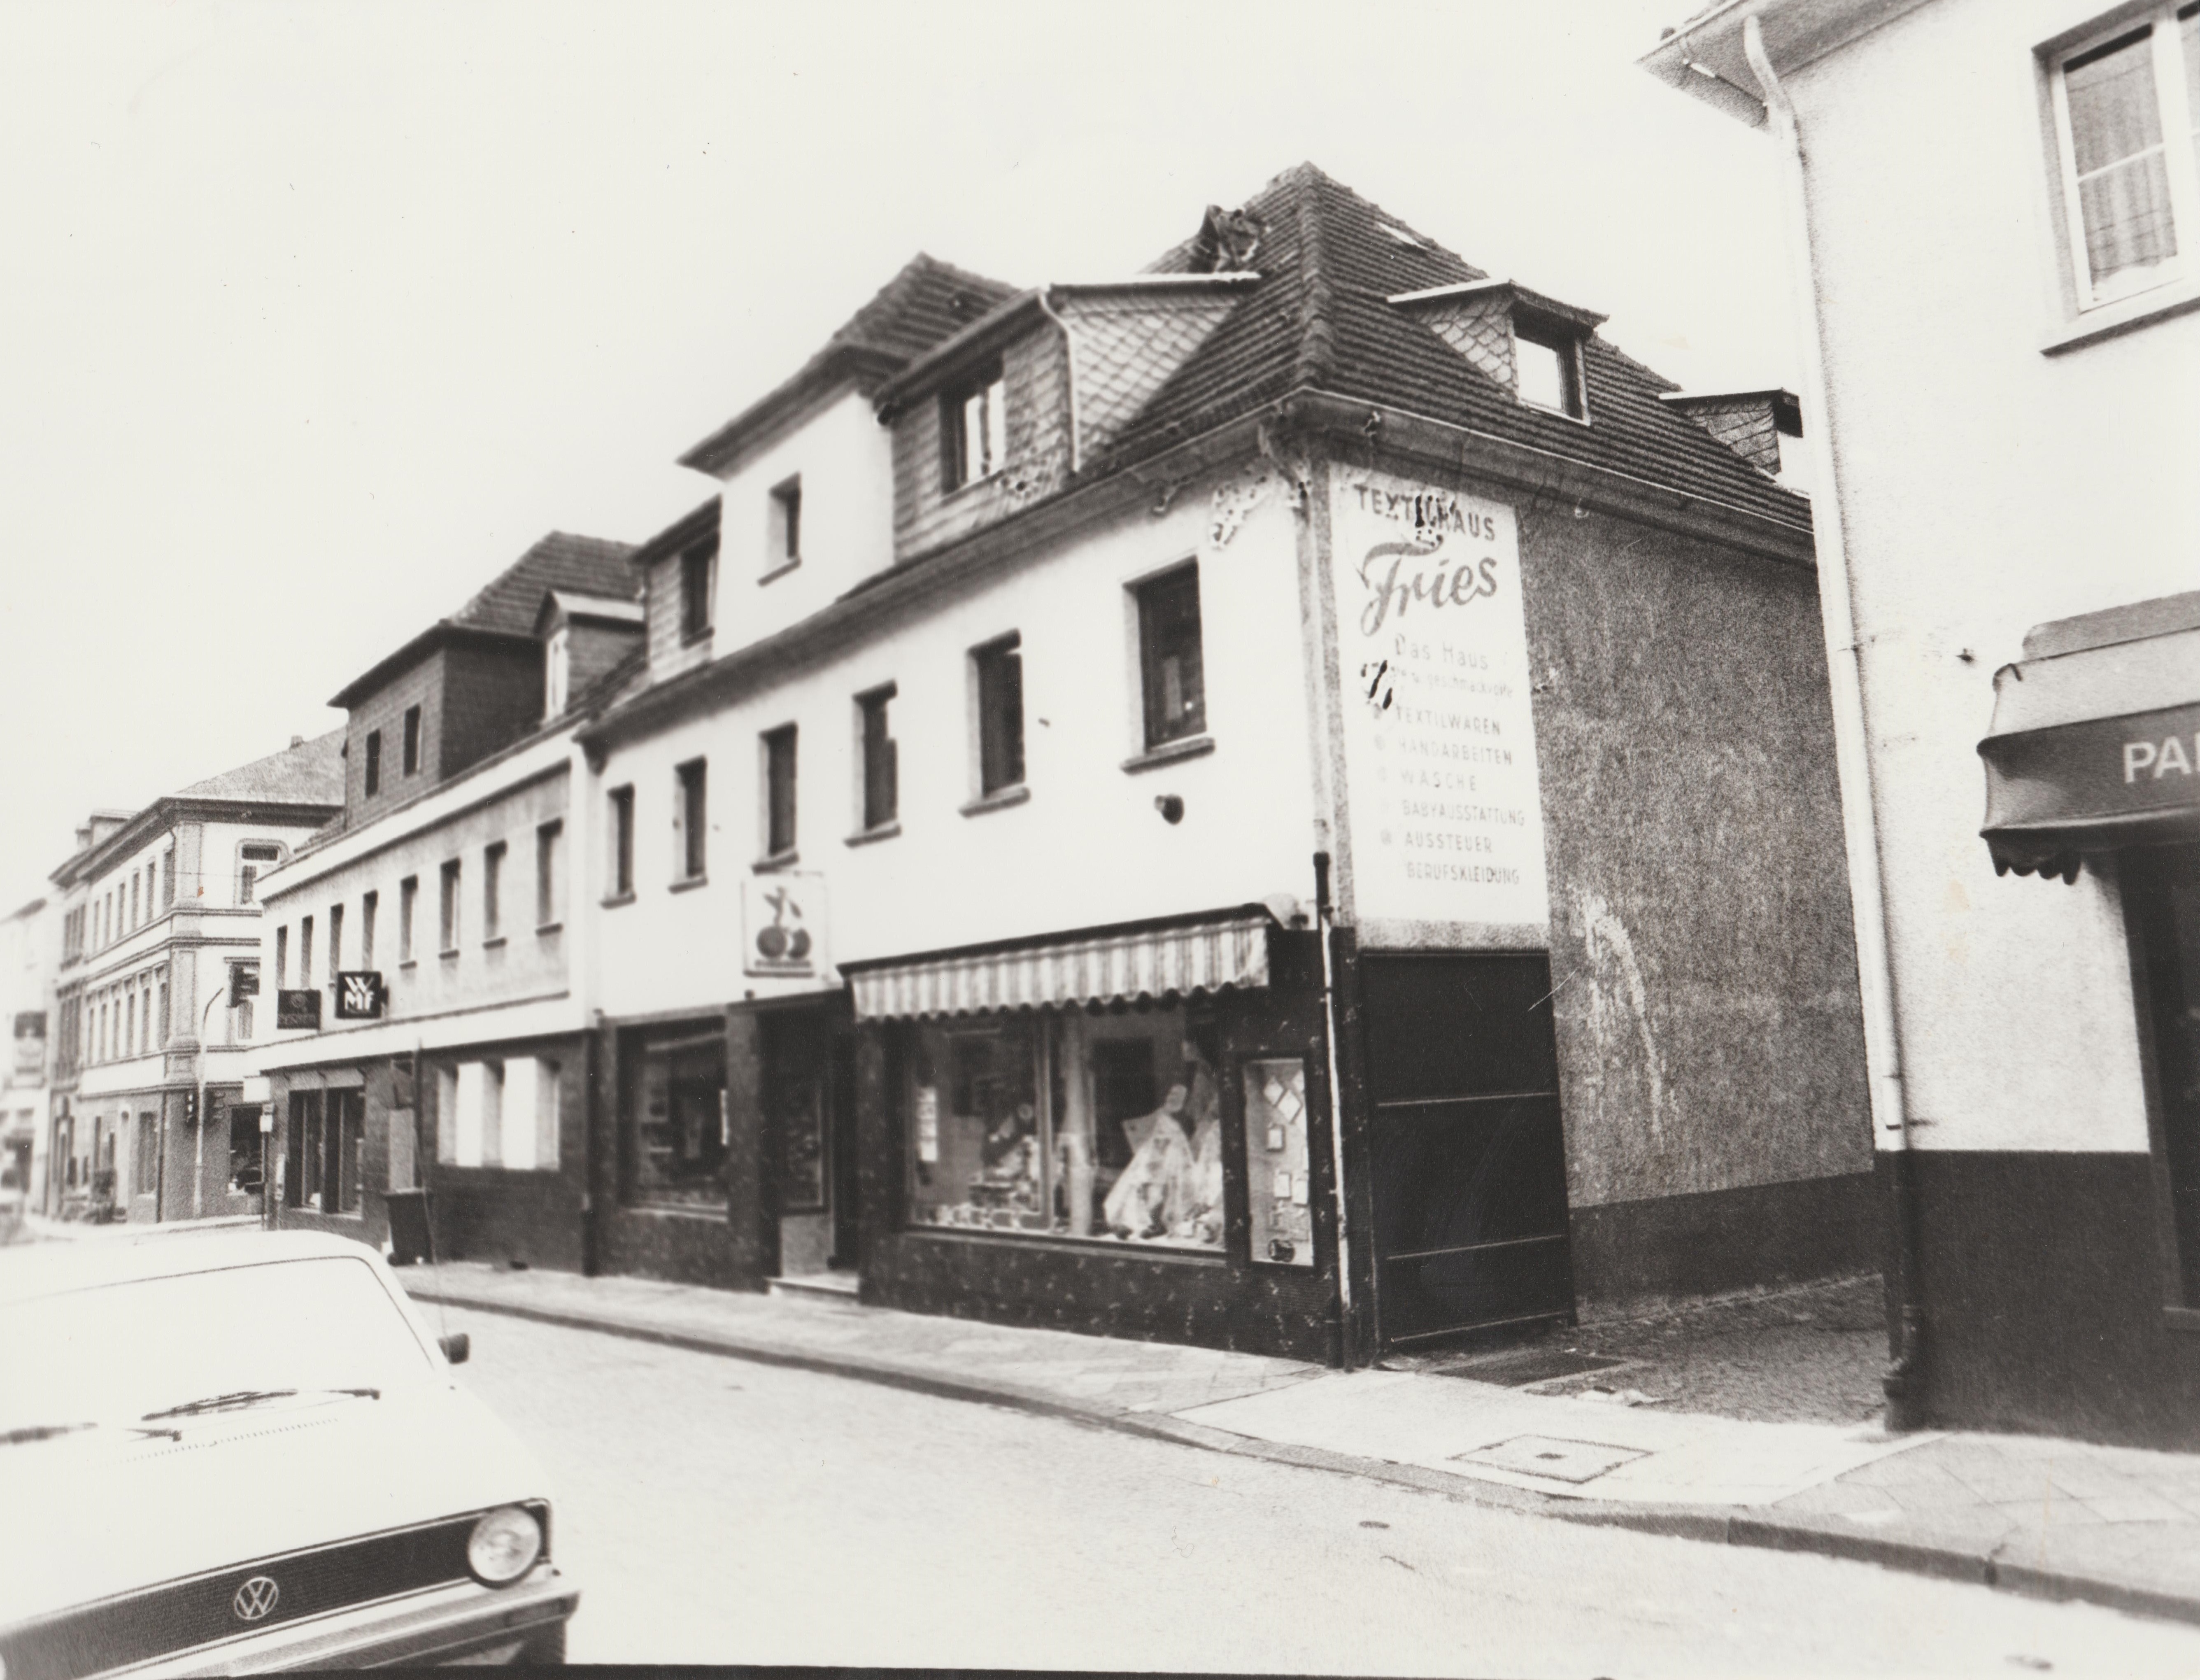 Obere Bachstrasse in Bendorf 1983 (REM CC BY-NC-SA)